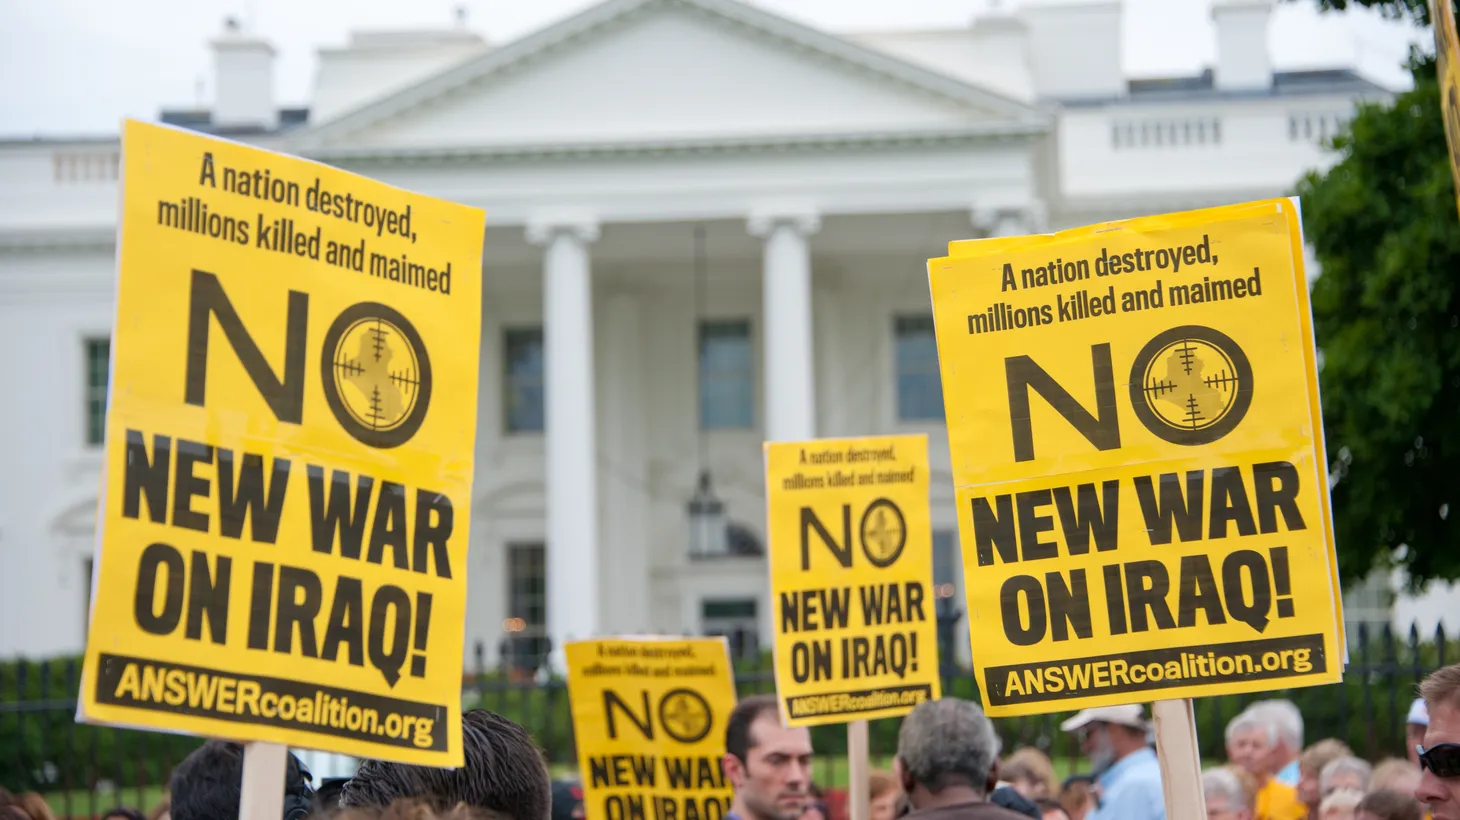 Anti-war demonstrators carry signs that say “no new war on Iraq!” in front of the White House in Washington, D.C. on June 21, 2014.